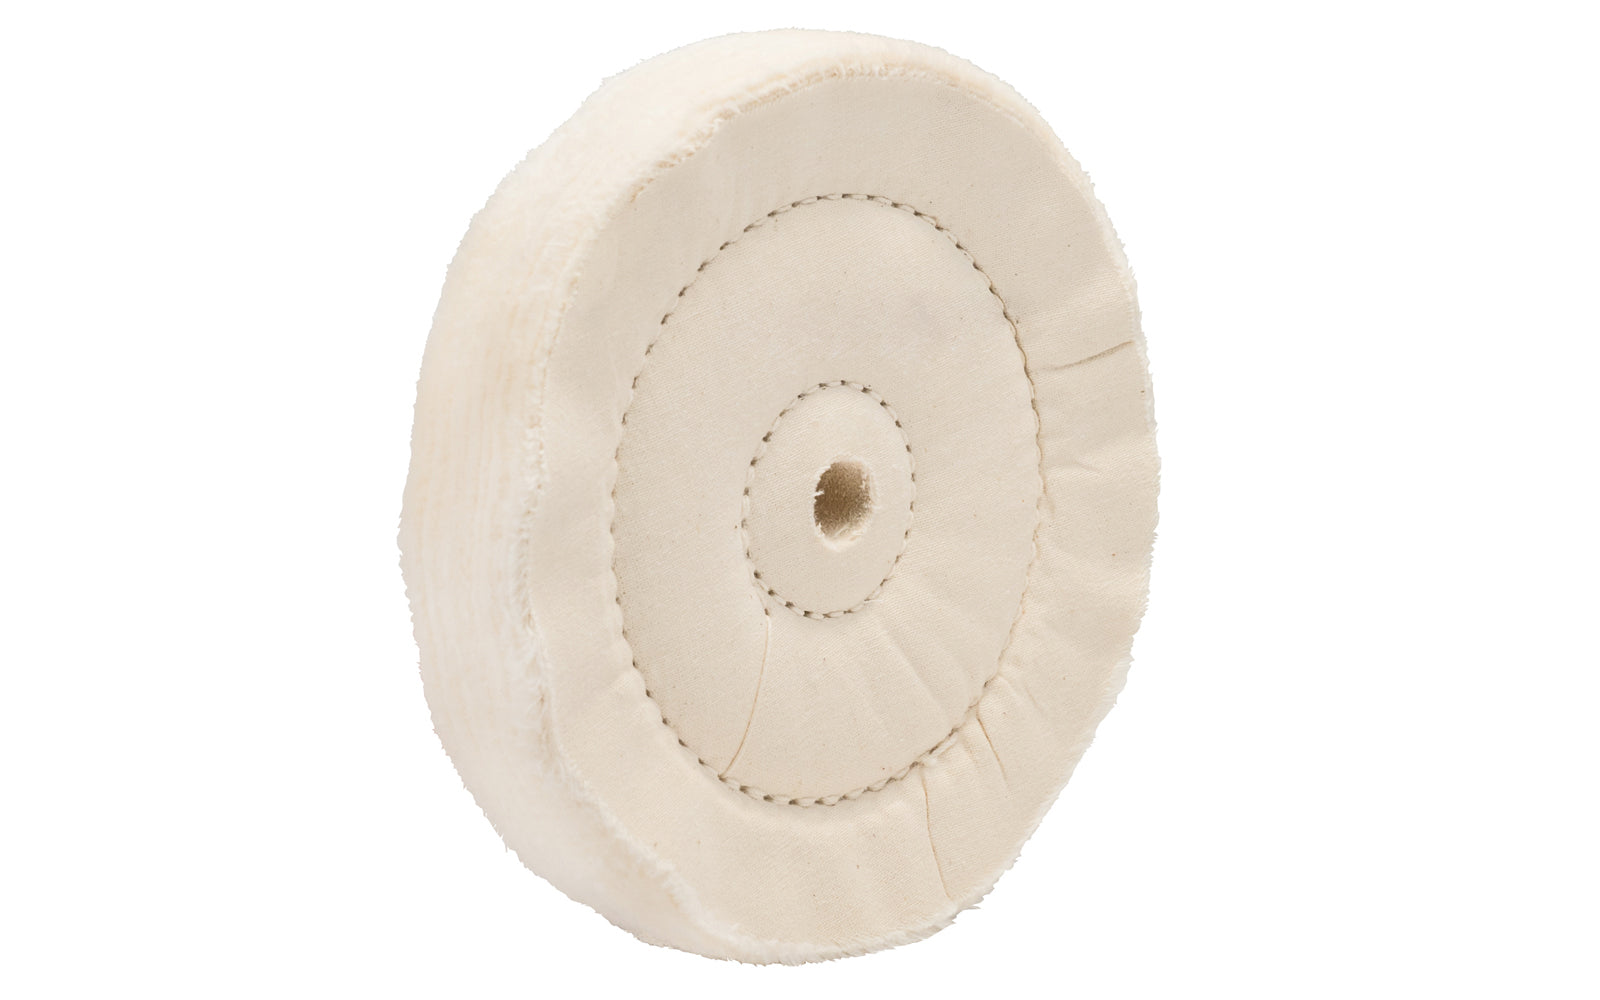 The 6" Cushion Sewn Buffing Wheel ~ 1" Thick is ideal for light cutting & coloring (polishing). 1/2" hole diameter. 1" wide thickness. Dico Polishing Company 525-72-6 Made in USA.